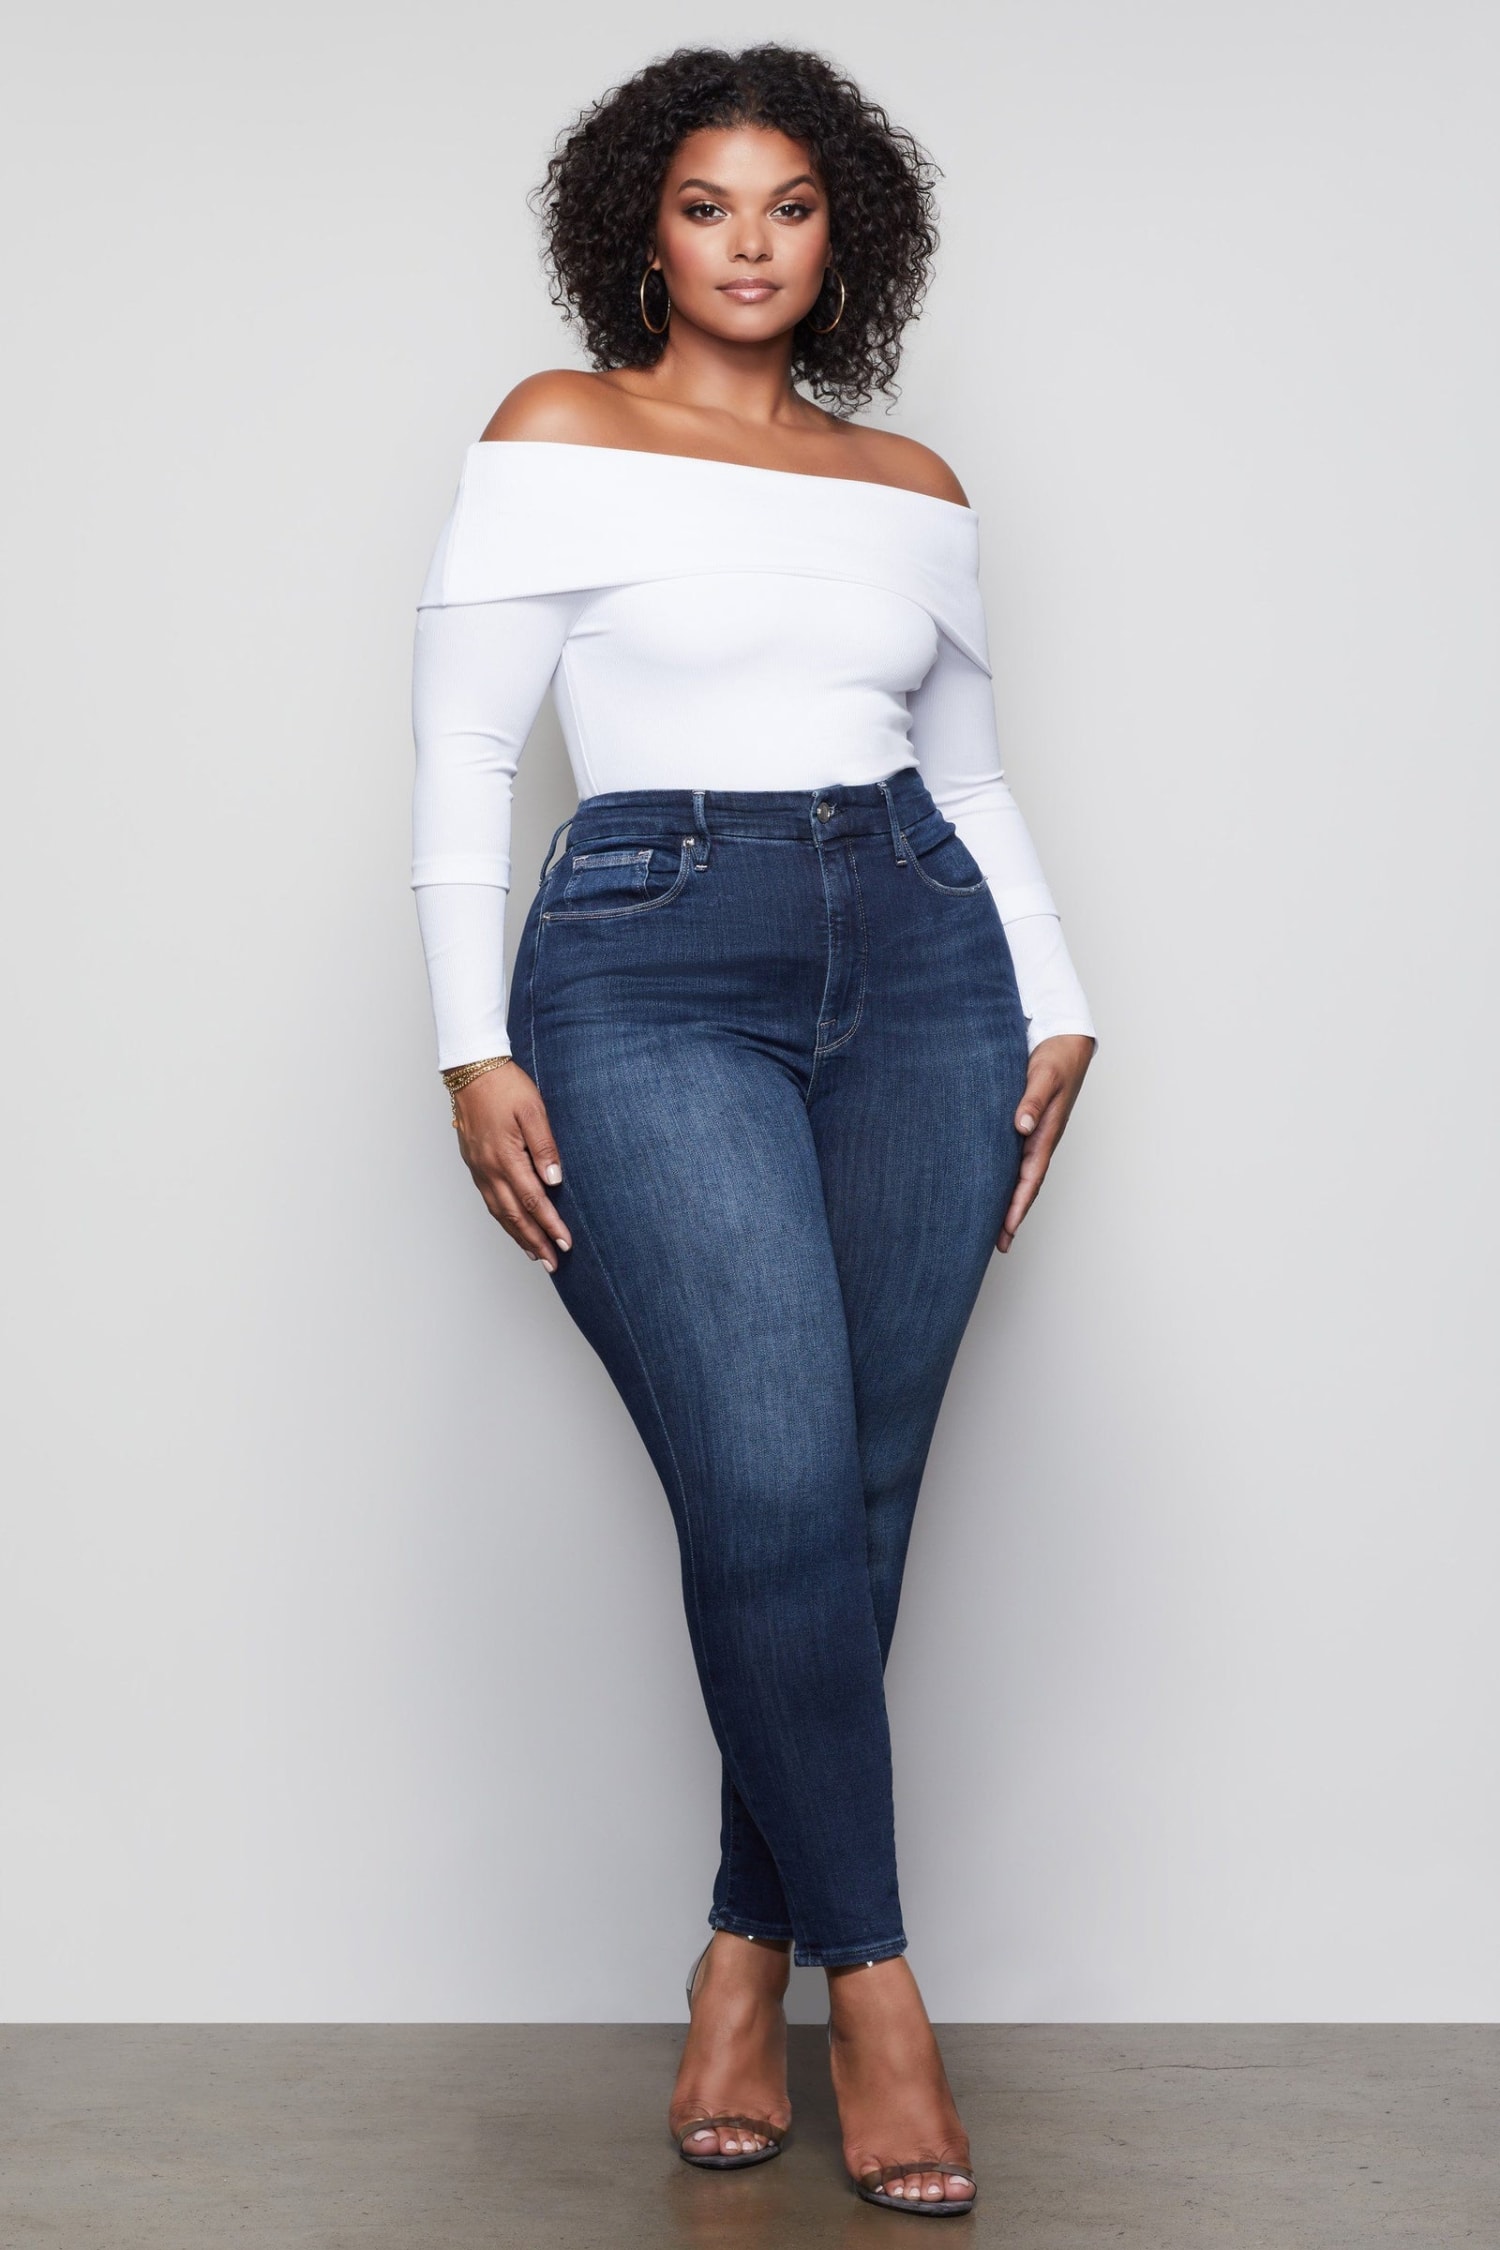 How To Shop For Jeans For Curvy Women, According To Stylists | atelier ...